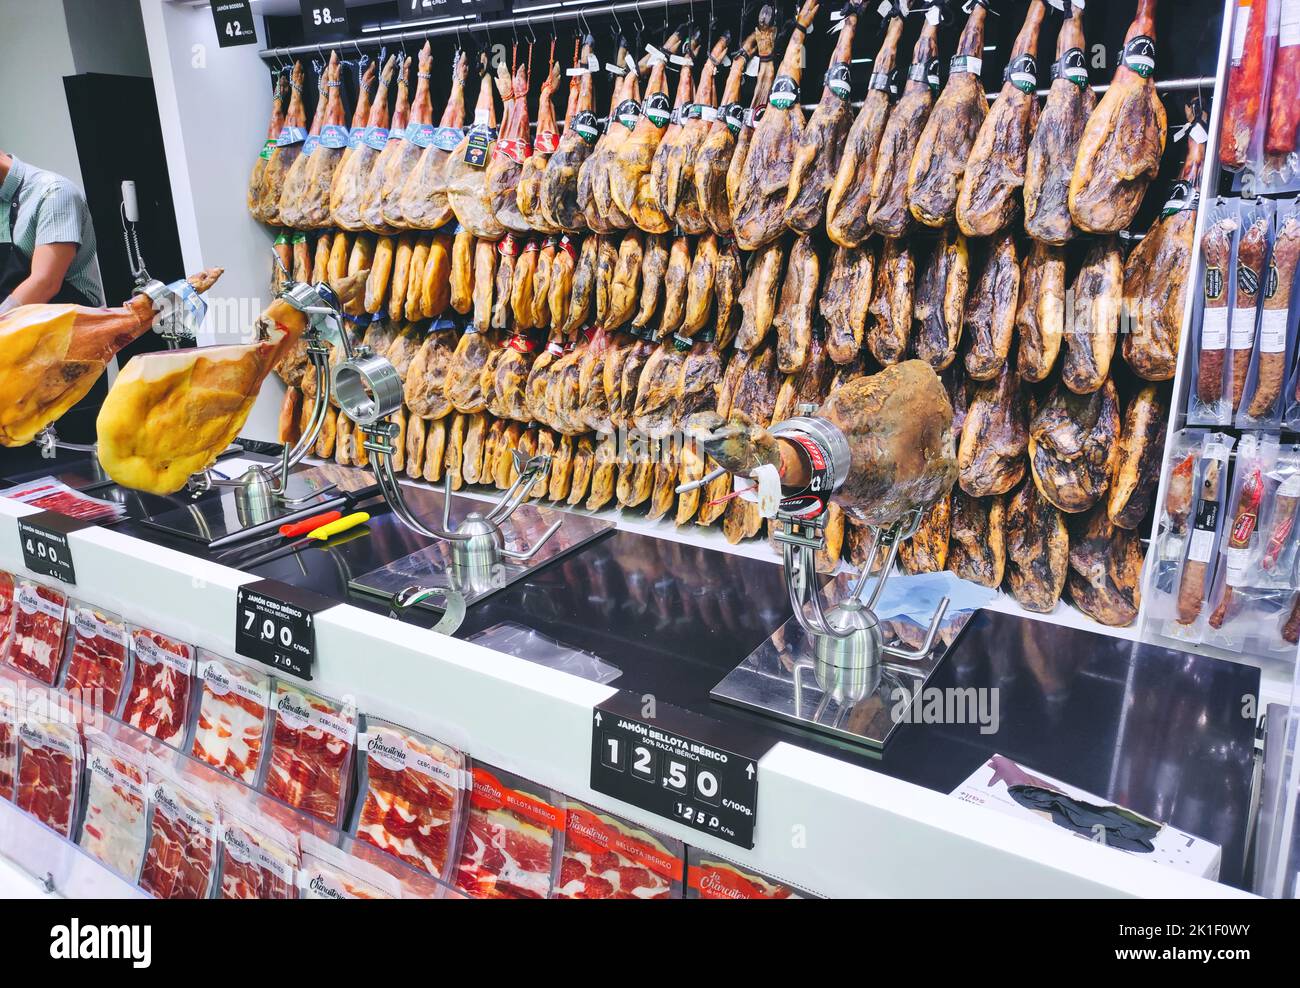 June 08 2022 - Seville, Spain: Hanging cured hams on the wall in a Spanish supermarket Stock Photo